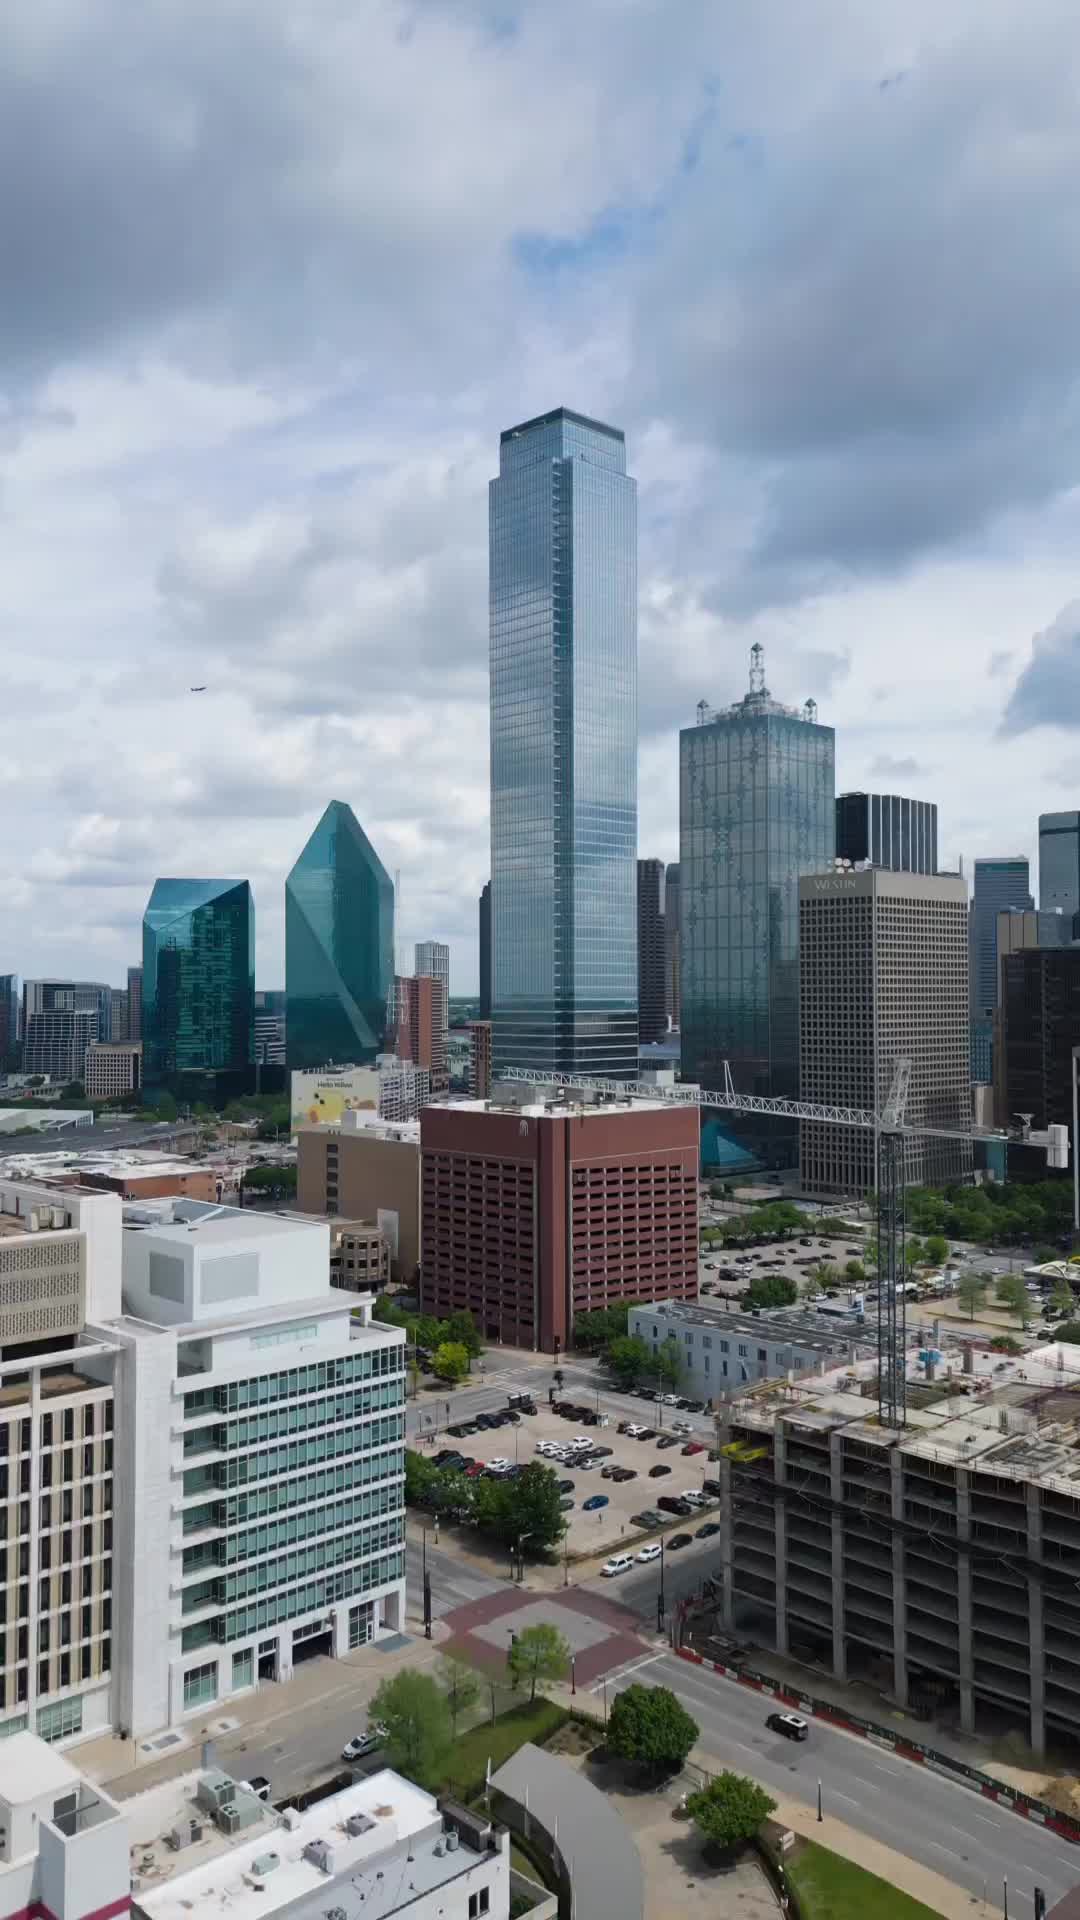 Stunning Drone Footage of Bank of America Plaza, Dallas